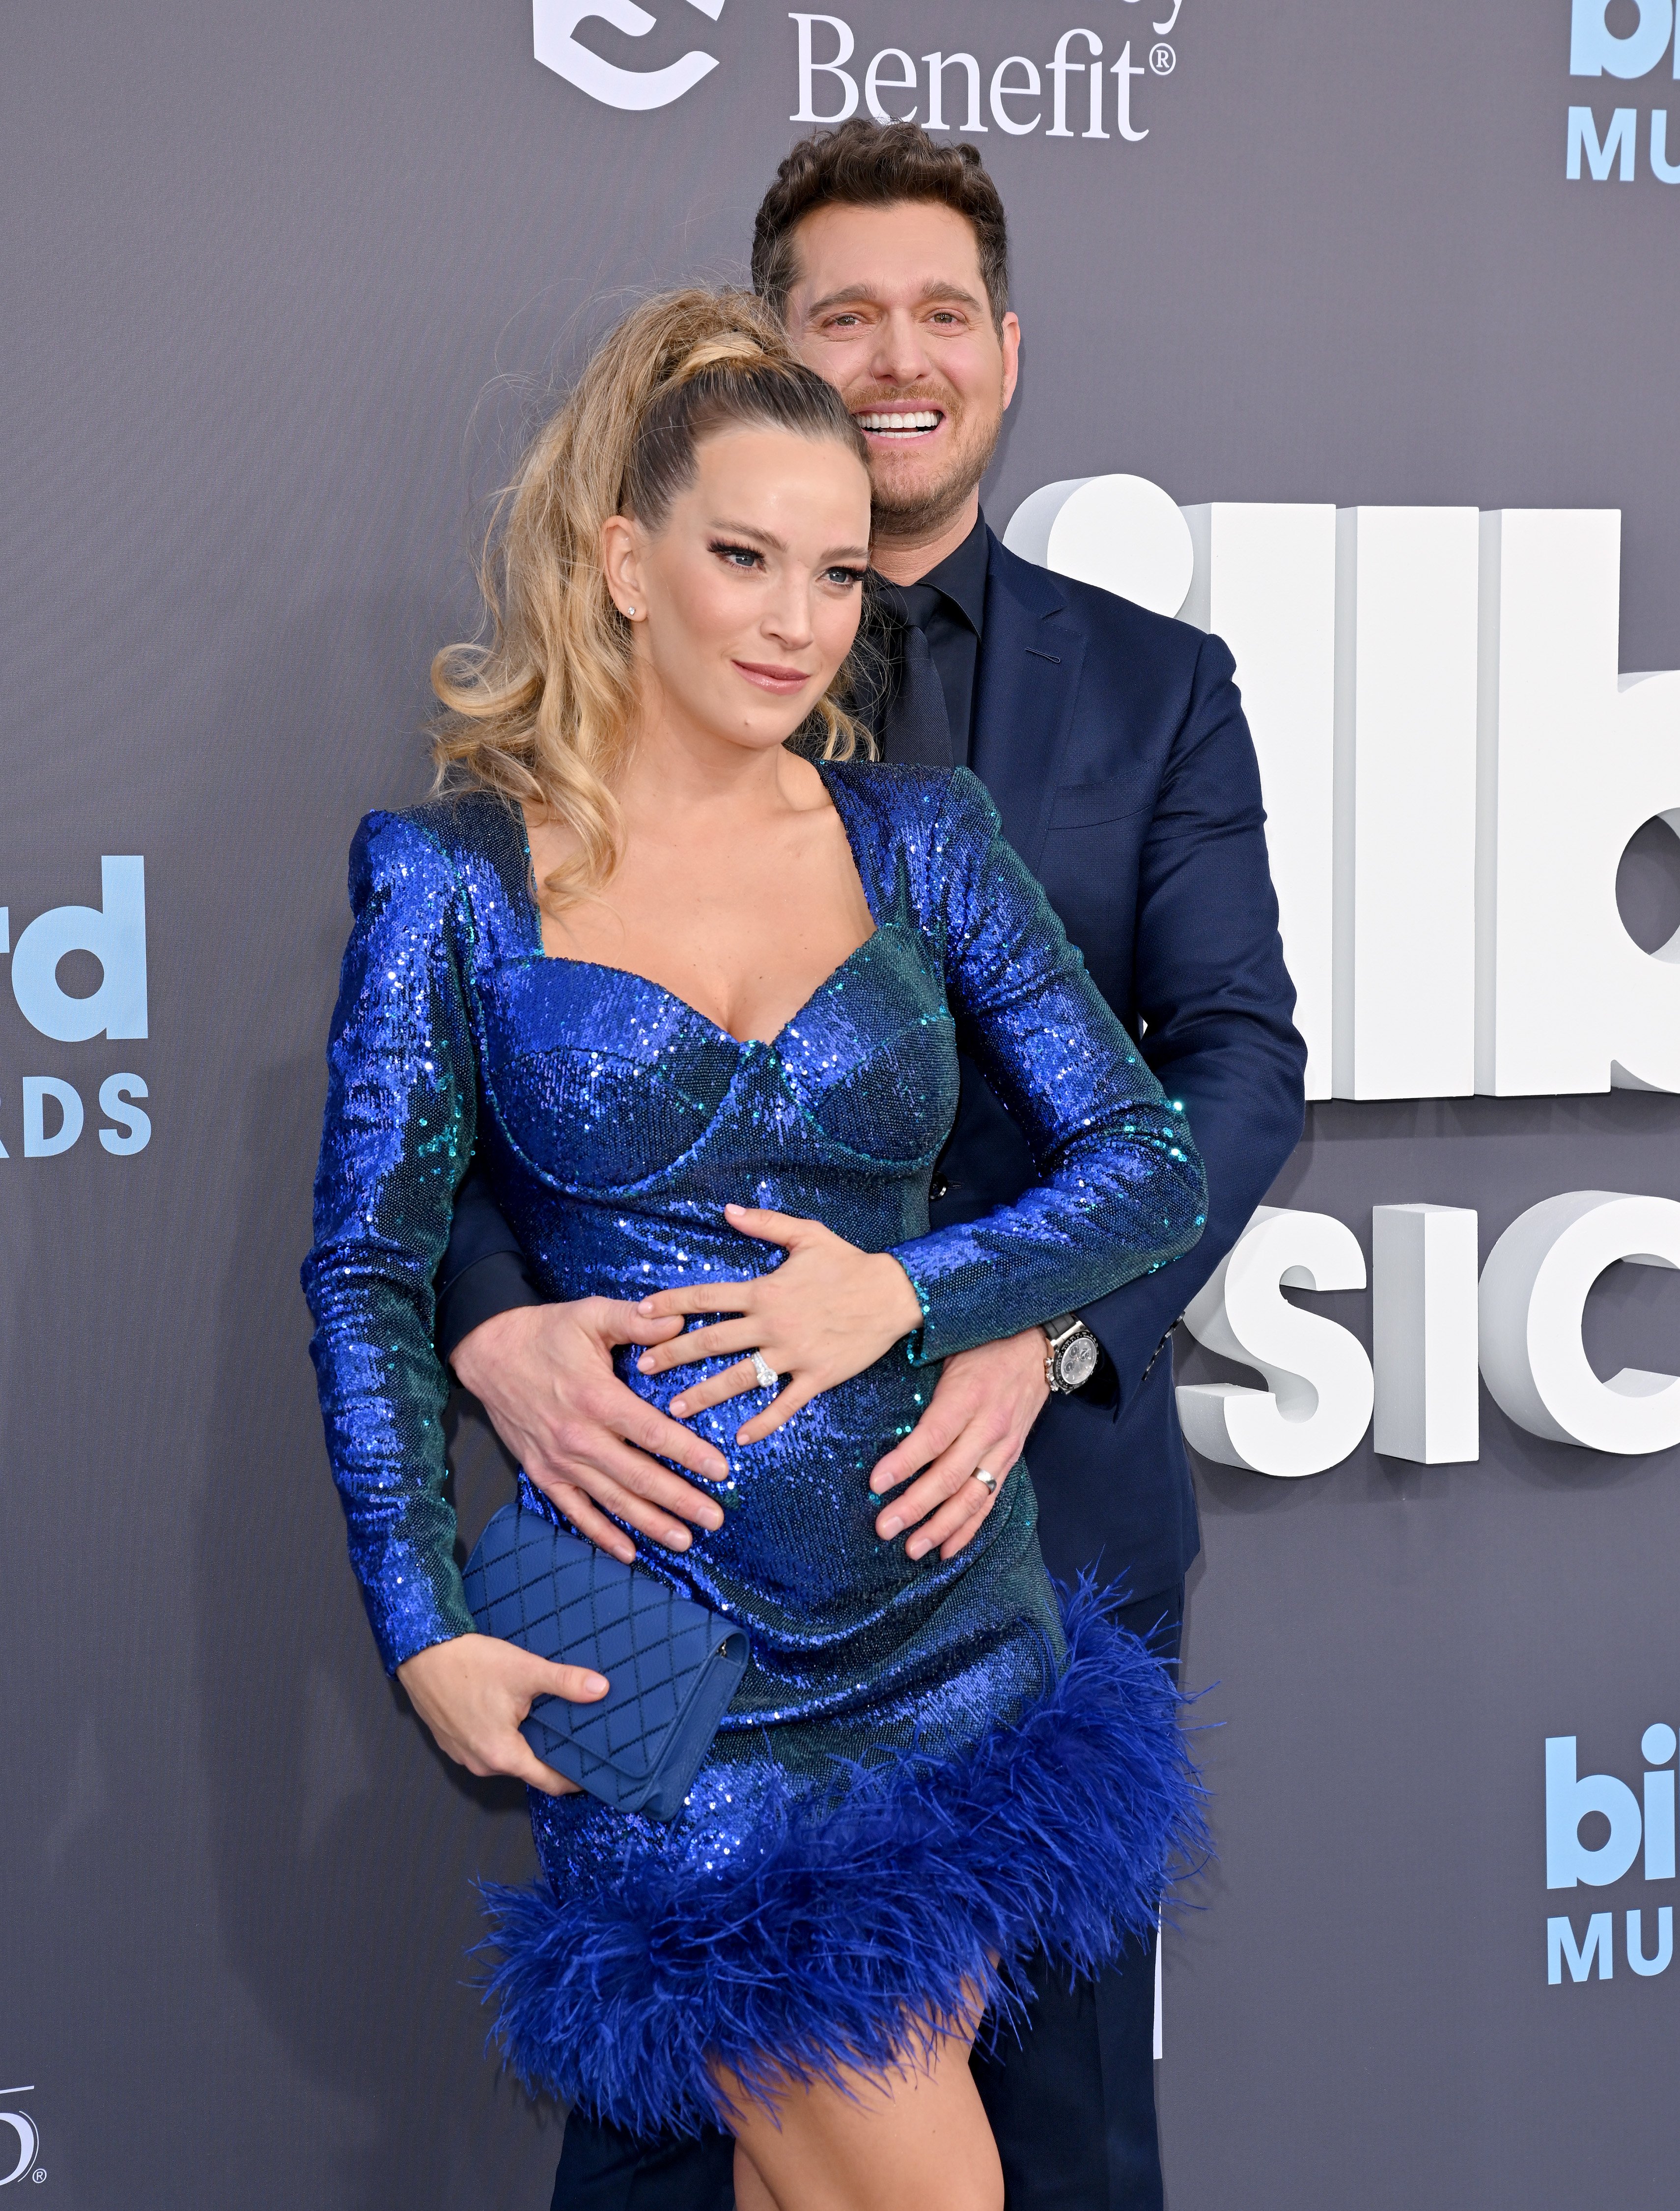 Luisana Lopilato and Michael Bublé atthe Billboard Music Awardson May 15, 2022, in Las Vegas, Nevada | Source: Getty Images